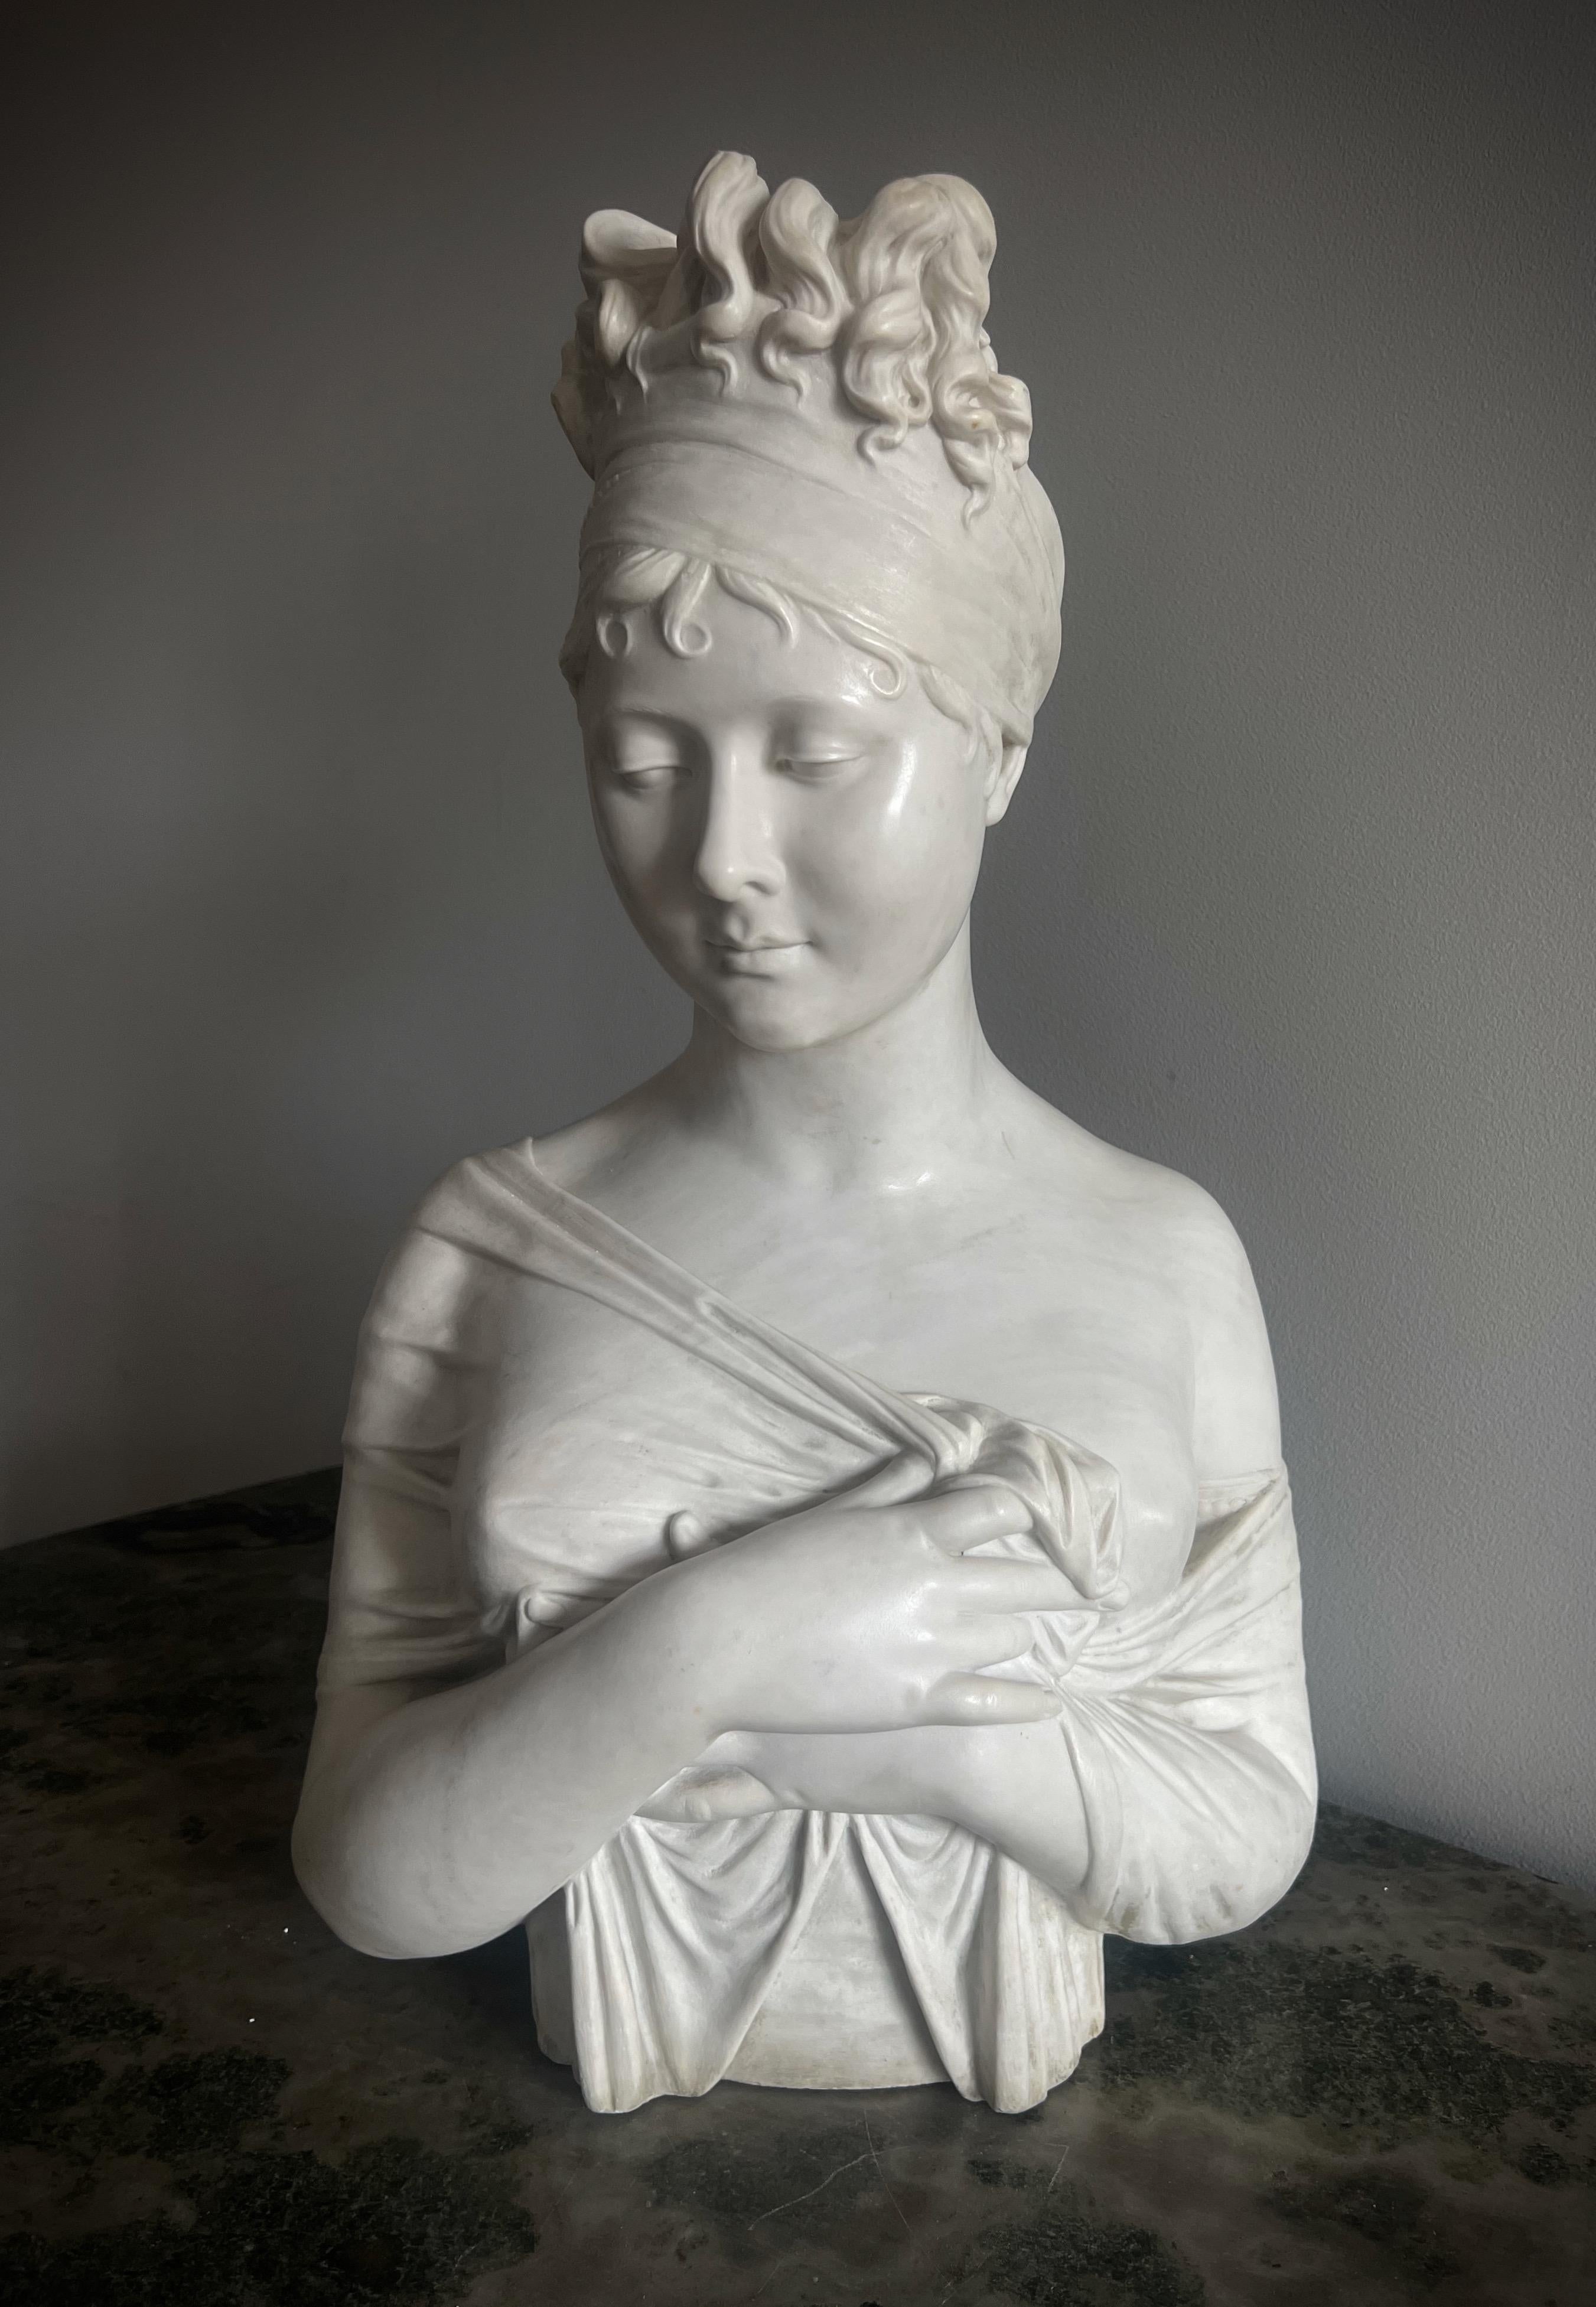 A fine antique white marble sculpture of madame Recamier after the famous sculpture by Joseph Chinard (1756-1813). 
Chinard was a French sculptor who worked in a Neoclassical style that was infused with naturalism and sentiment. He received his